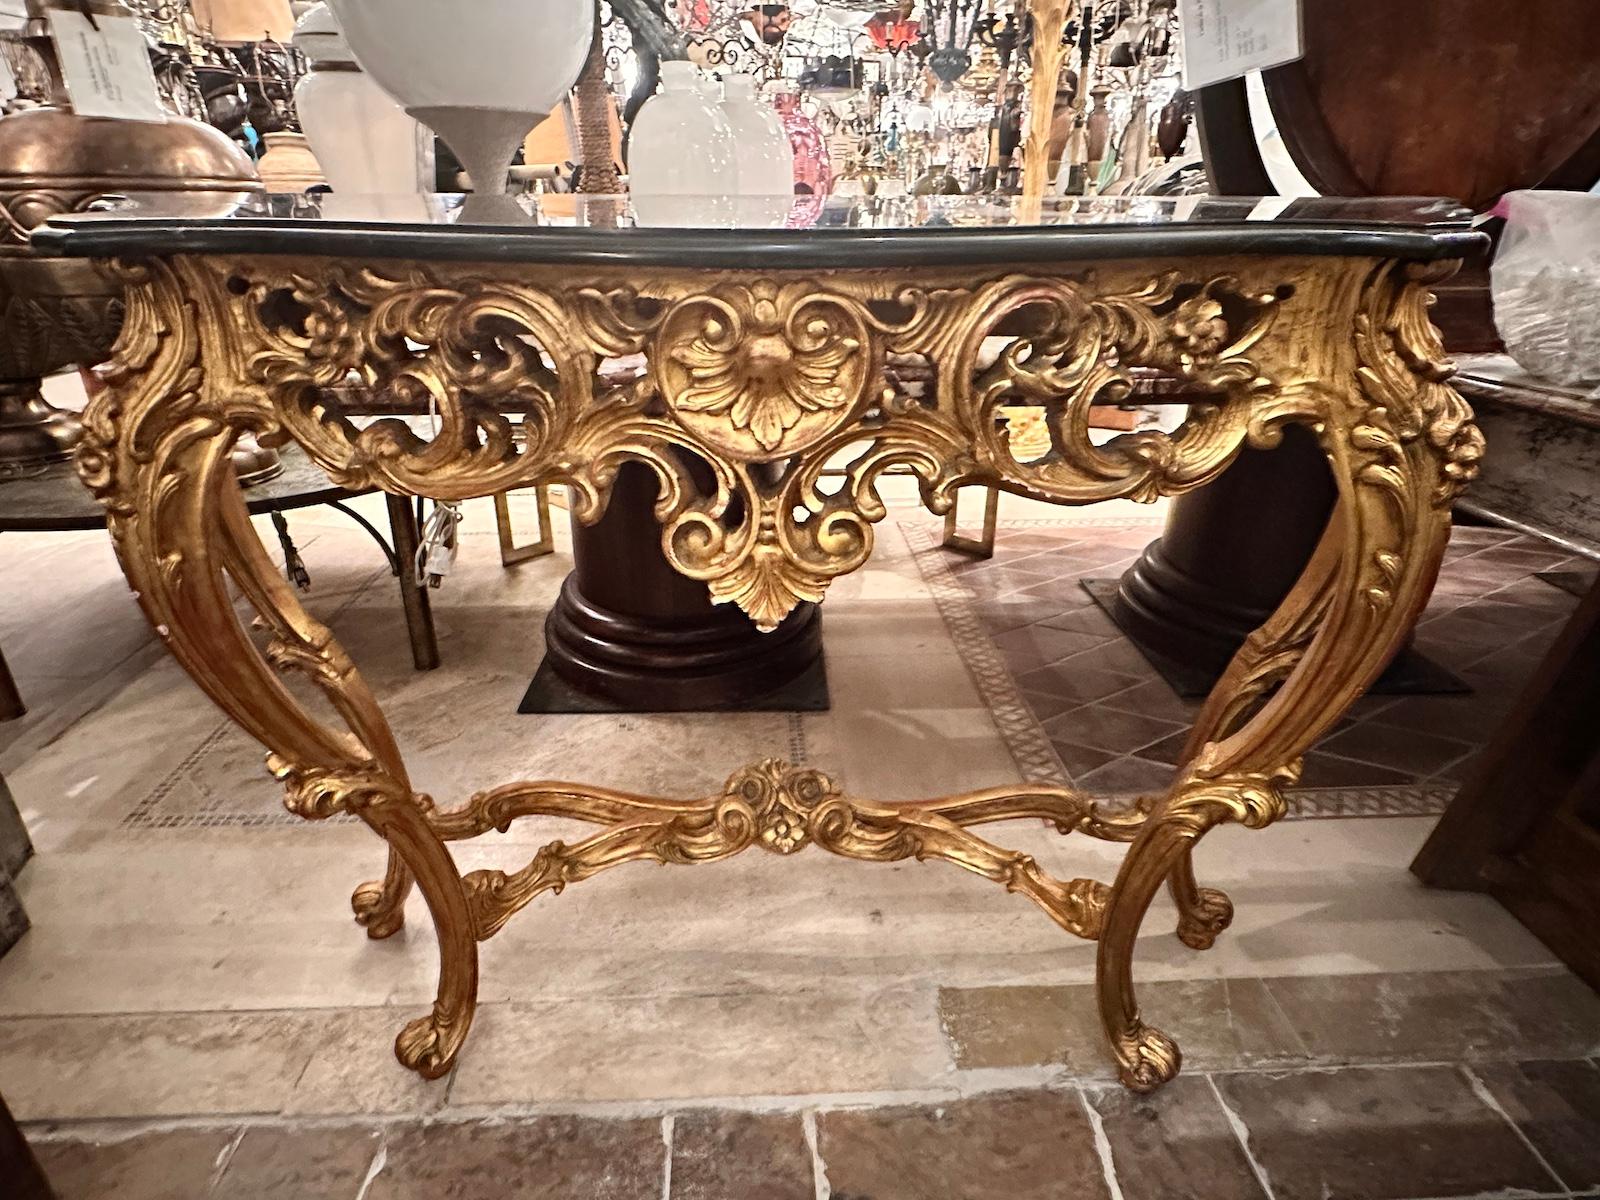 A circa 1950's French gilt wood and marble top console.

Measurements:
Height: 35.5